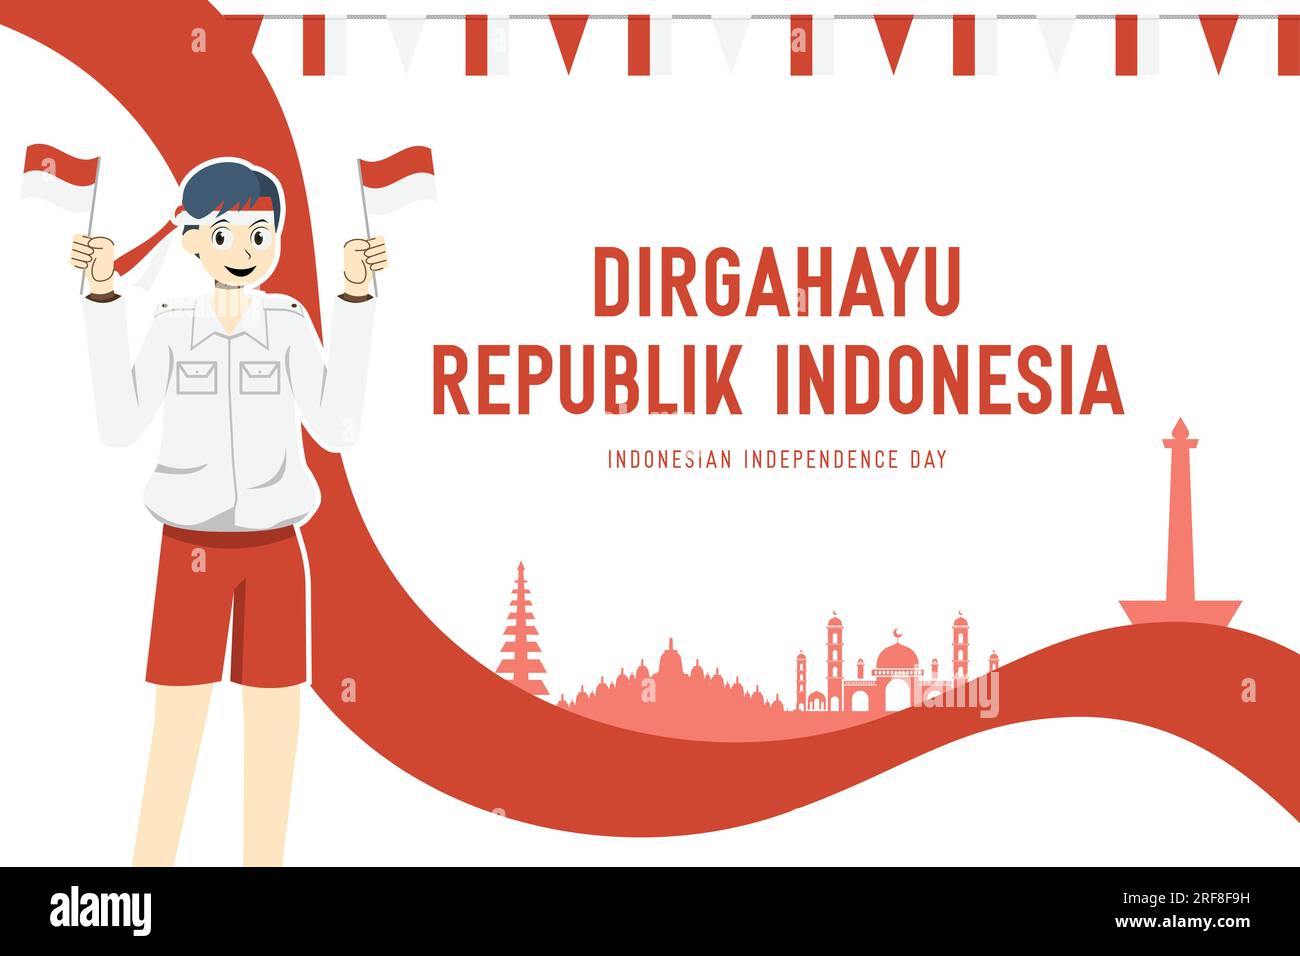 Indonesian independence day template Stock Vector